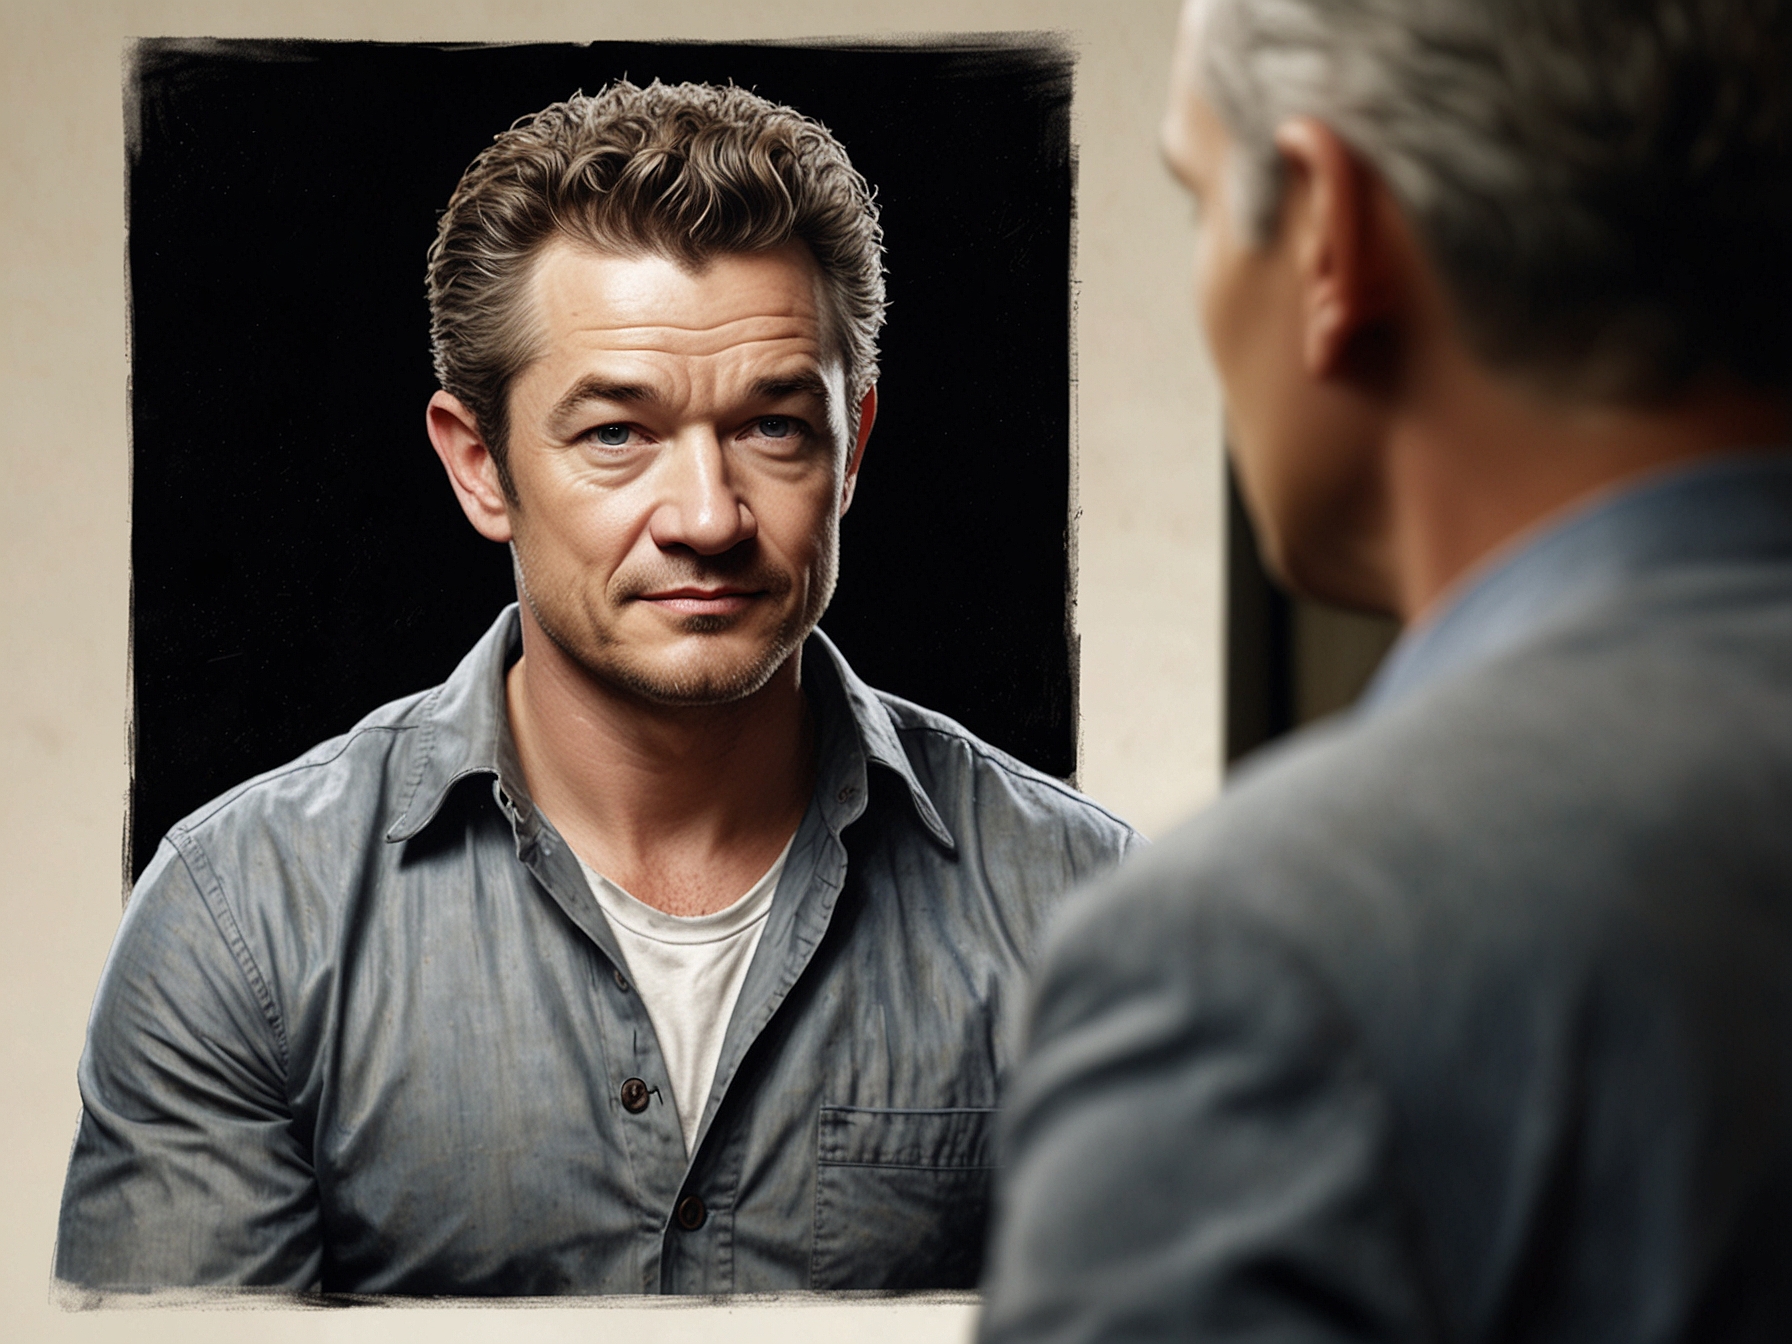 A recent image of James Marsters during a TV interview, featuring his new look with a graying beard and mature demeanor, highlighting his transformation from his 90s heartthrob days.